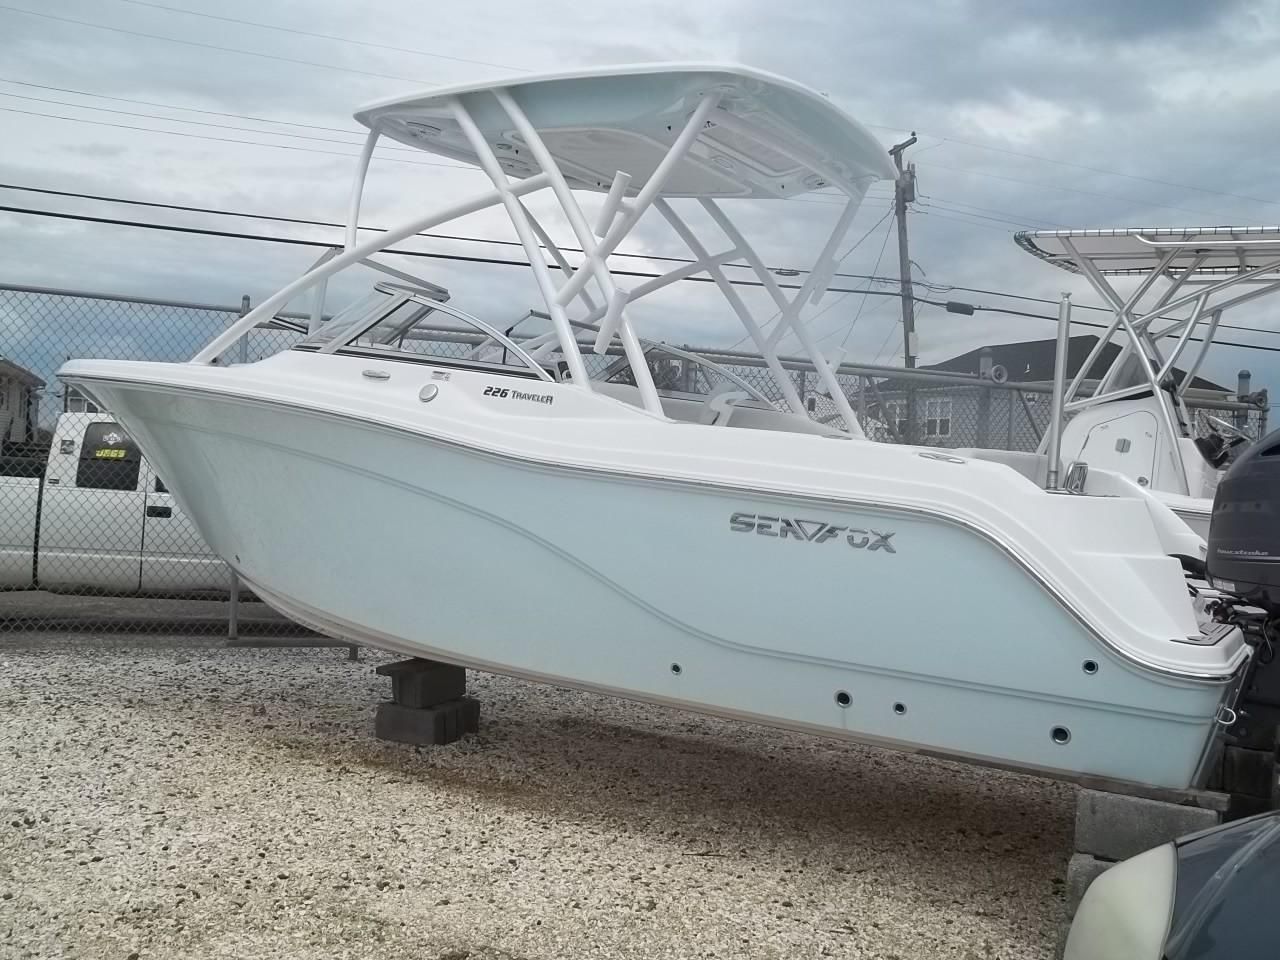 2020 Sea Fox 226 Traveler Power New and Used Boats for Sale